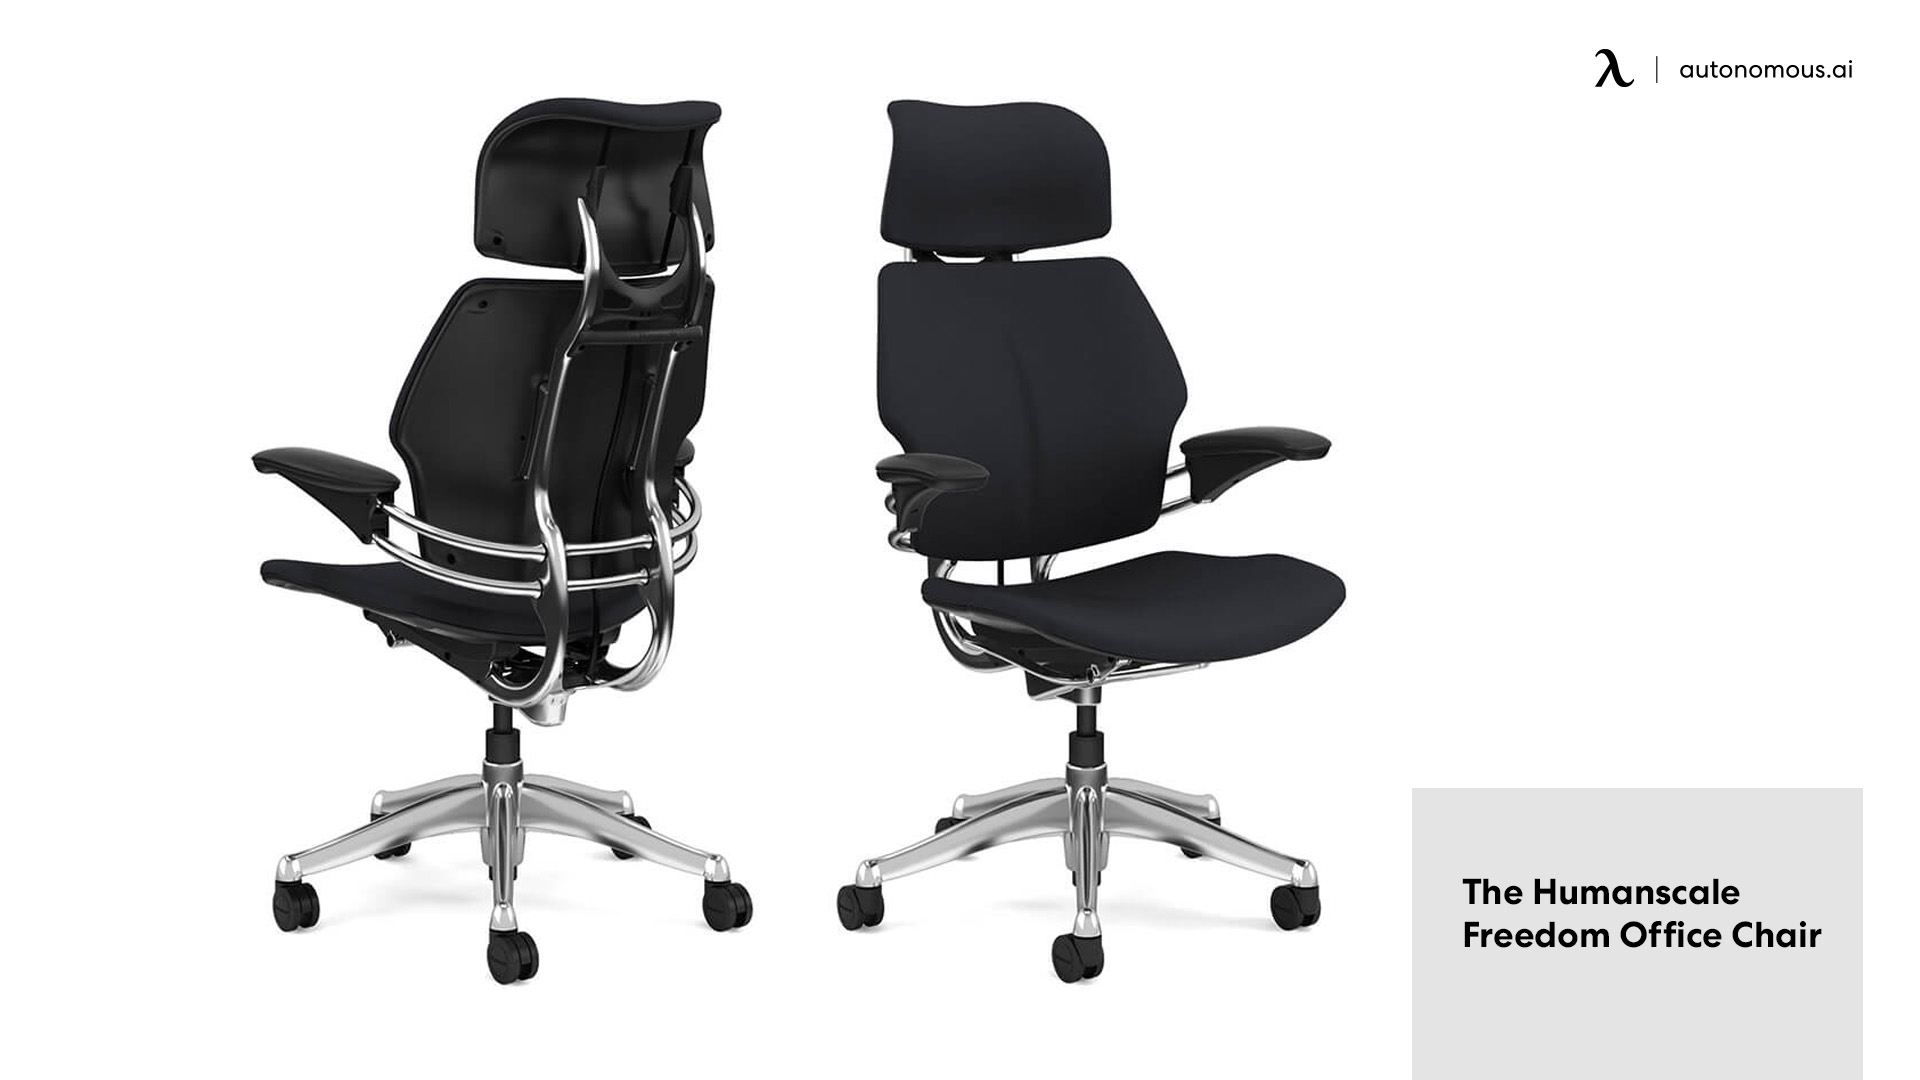 The Humanscale Freedom Office Chair